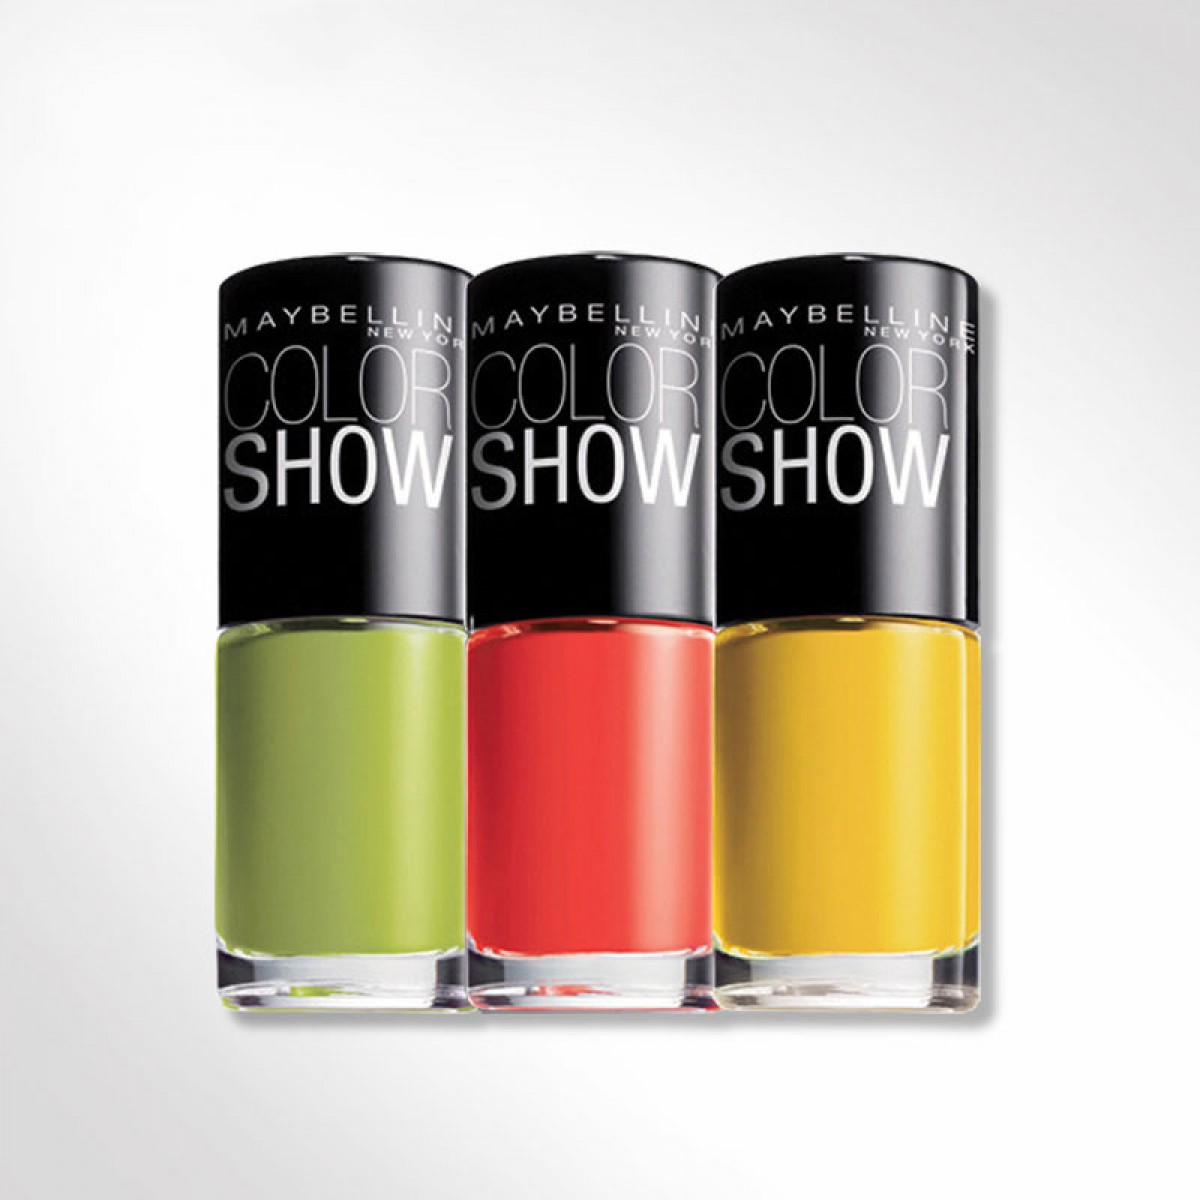 Maybelline color show nail polish candy color professional makeup manicure special color, multicolored optional color